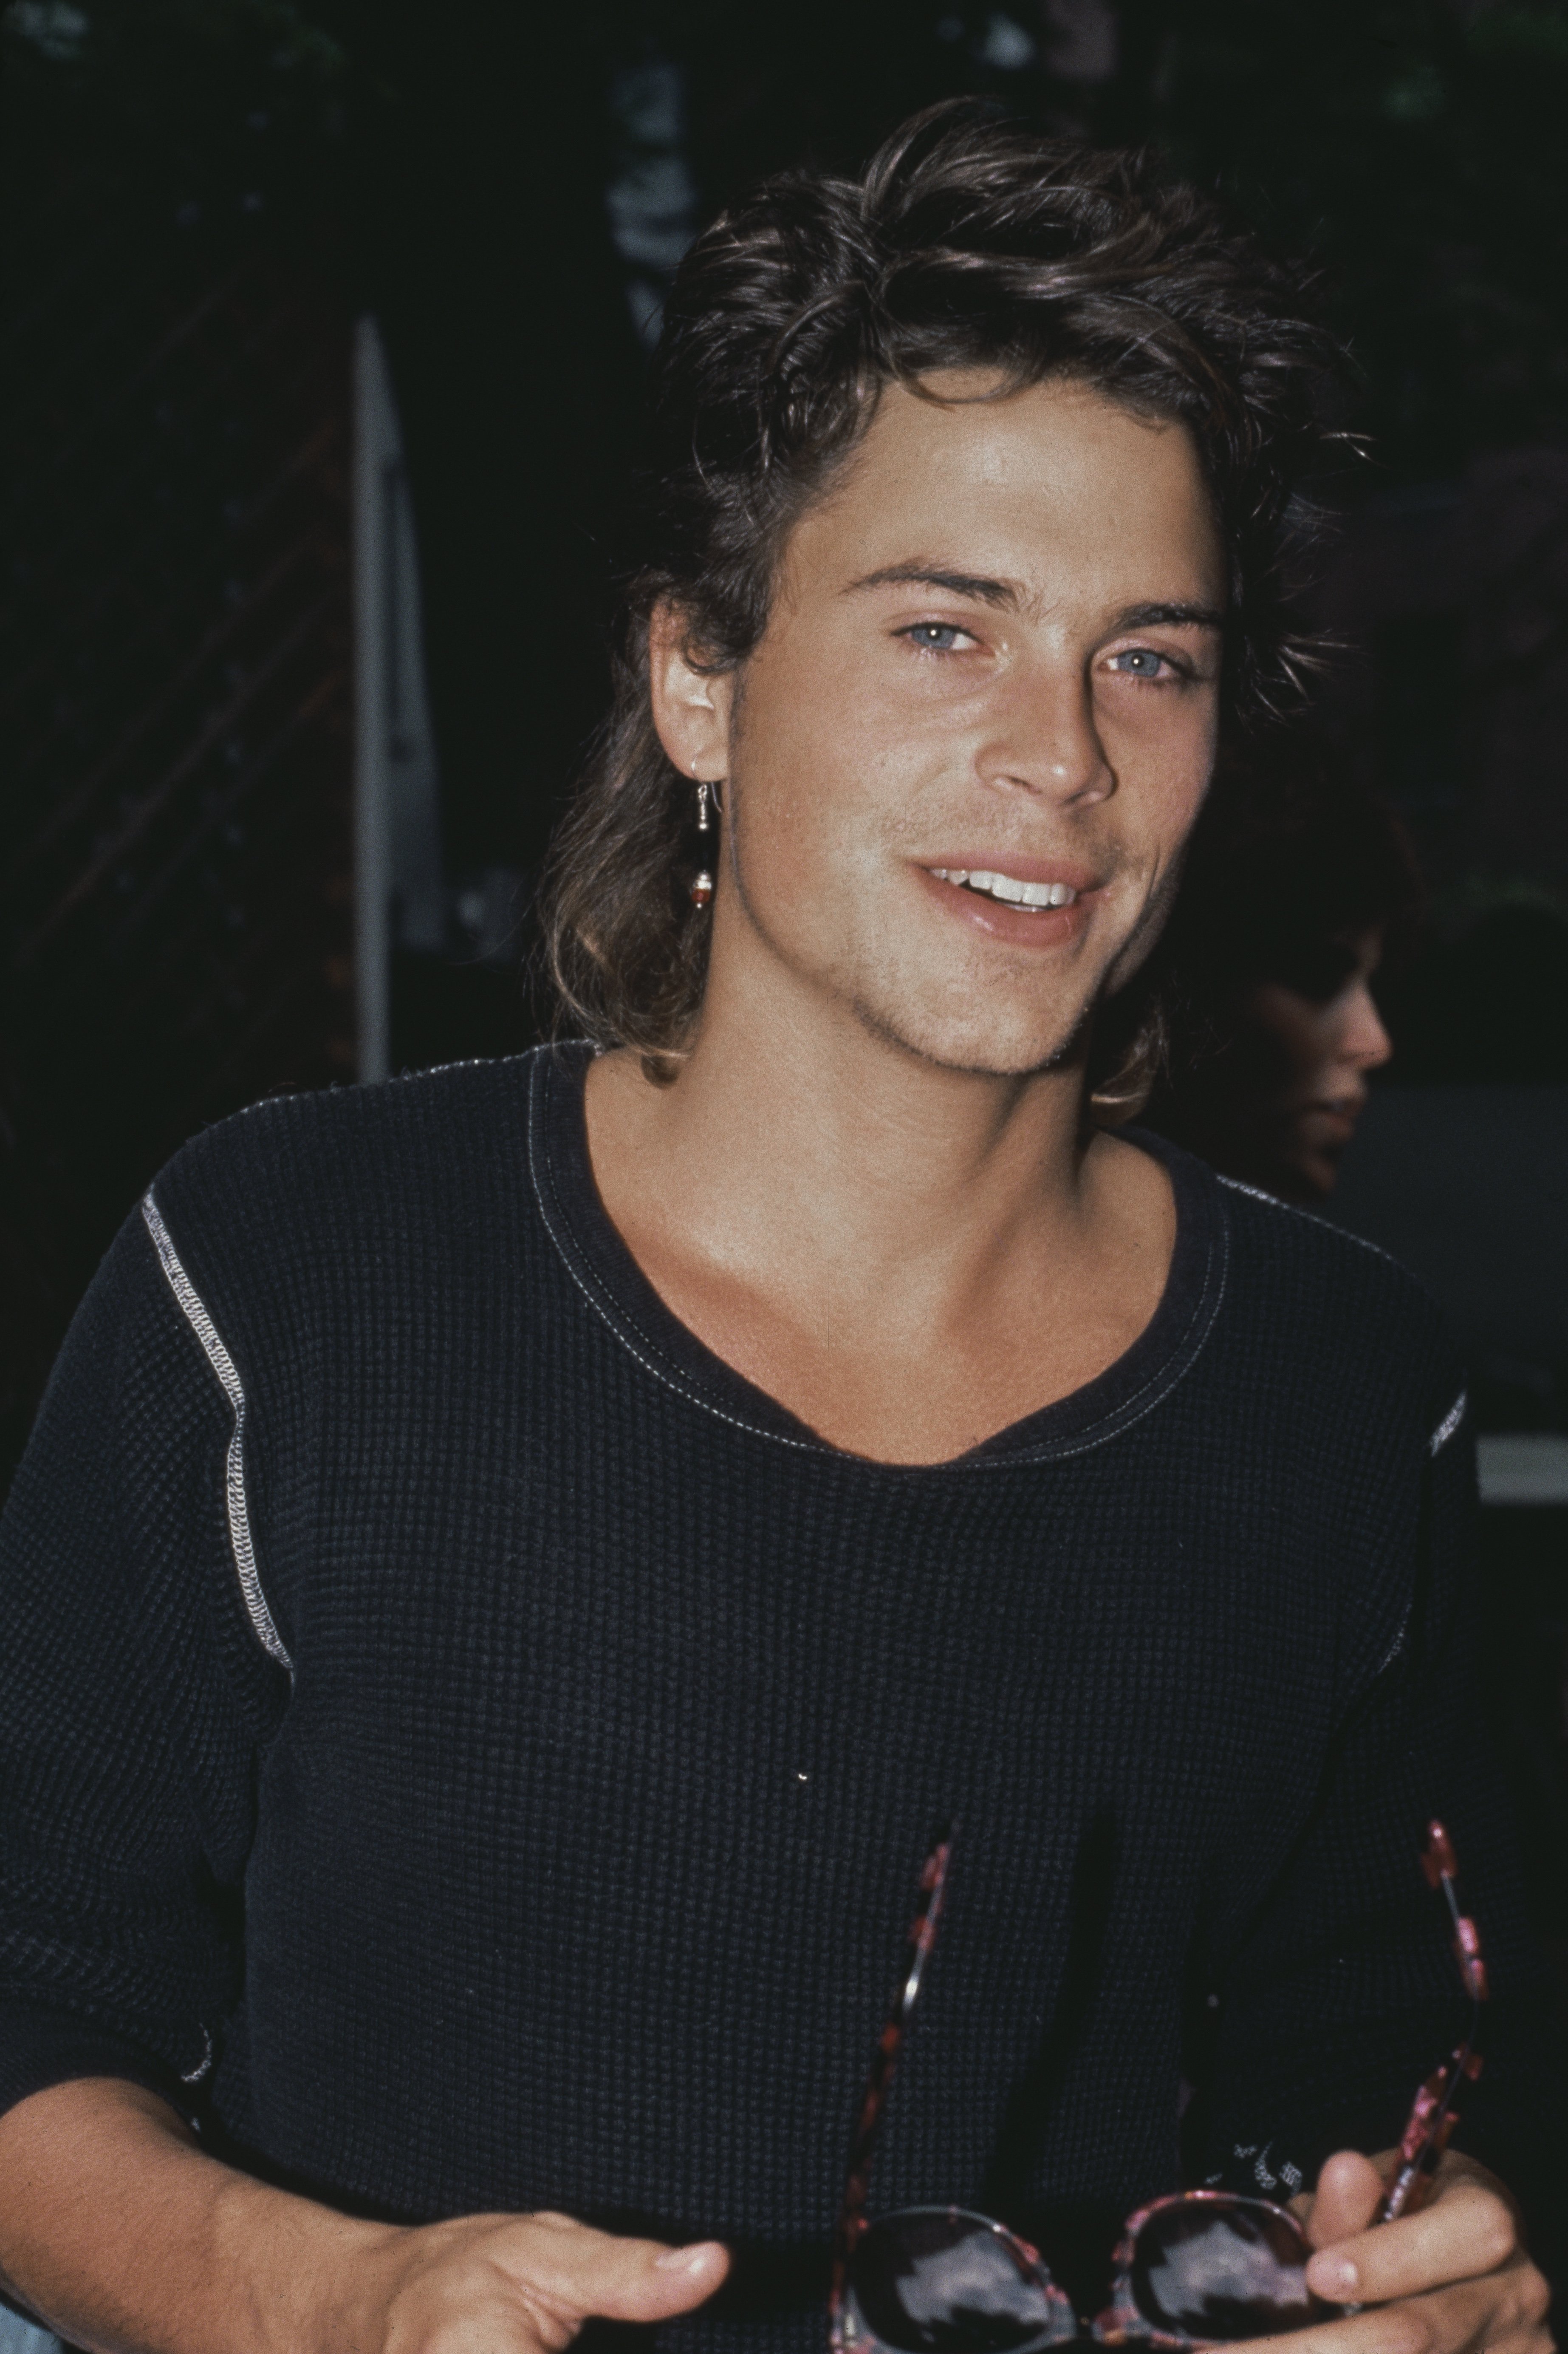 Rob Lowe captured beaming, wearing a black top while holding a pair of sunglasses in 1985. / Source: Getty Images